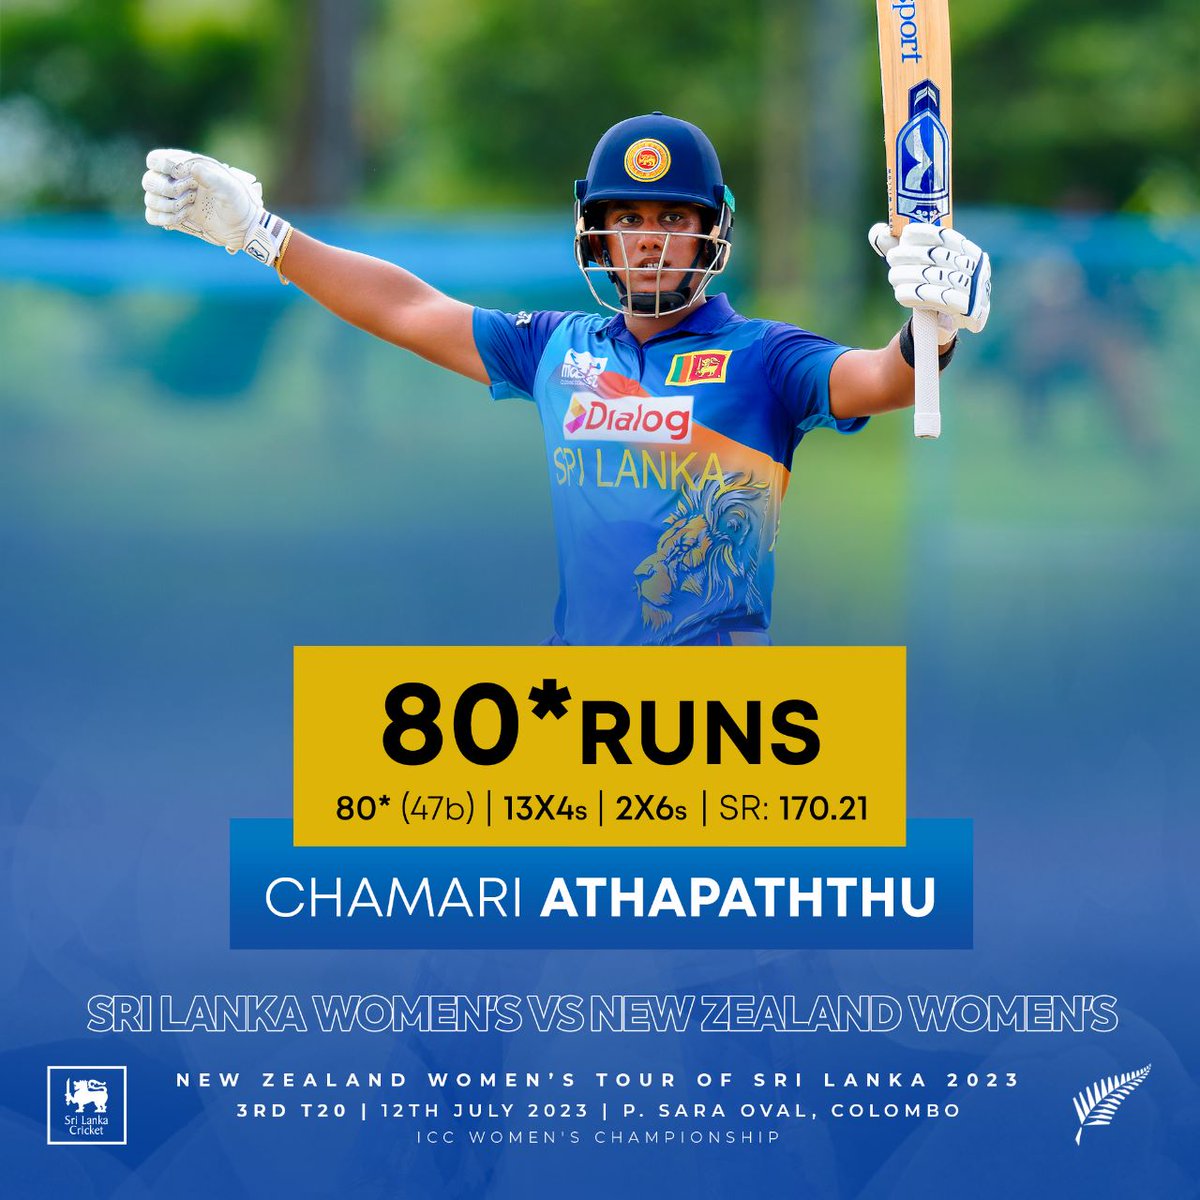 Chamari Athapaththu smashes 80 runs off 47 balls, including a mind-blowing fifty off just 25 balls, setting a new record as the fastest fifty by a Sri Lankan! 💥🔥

#LionessRoar #SLvNZ